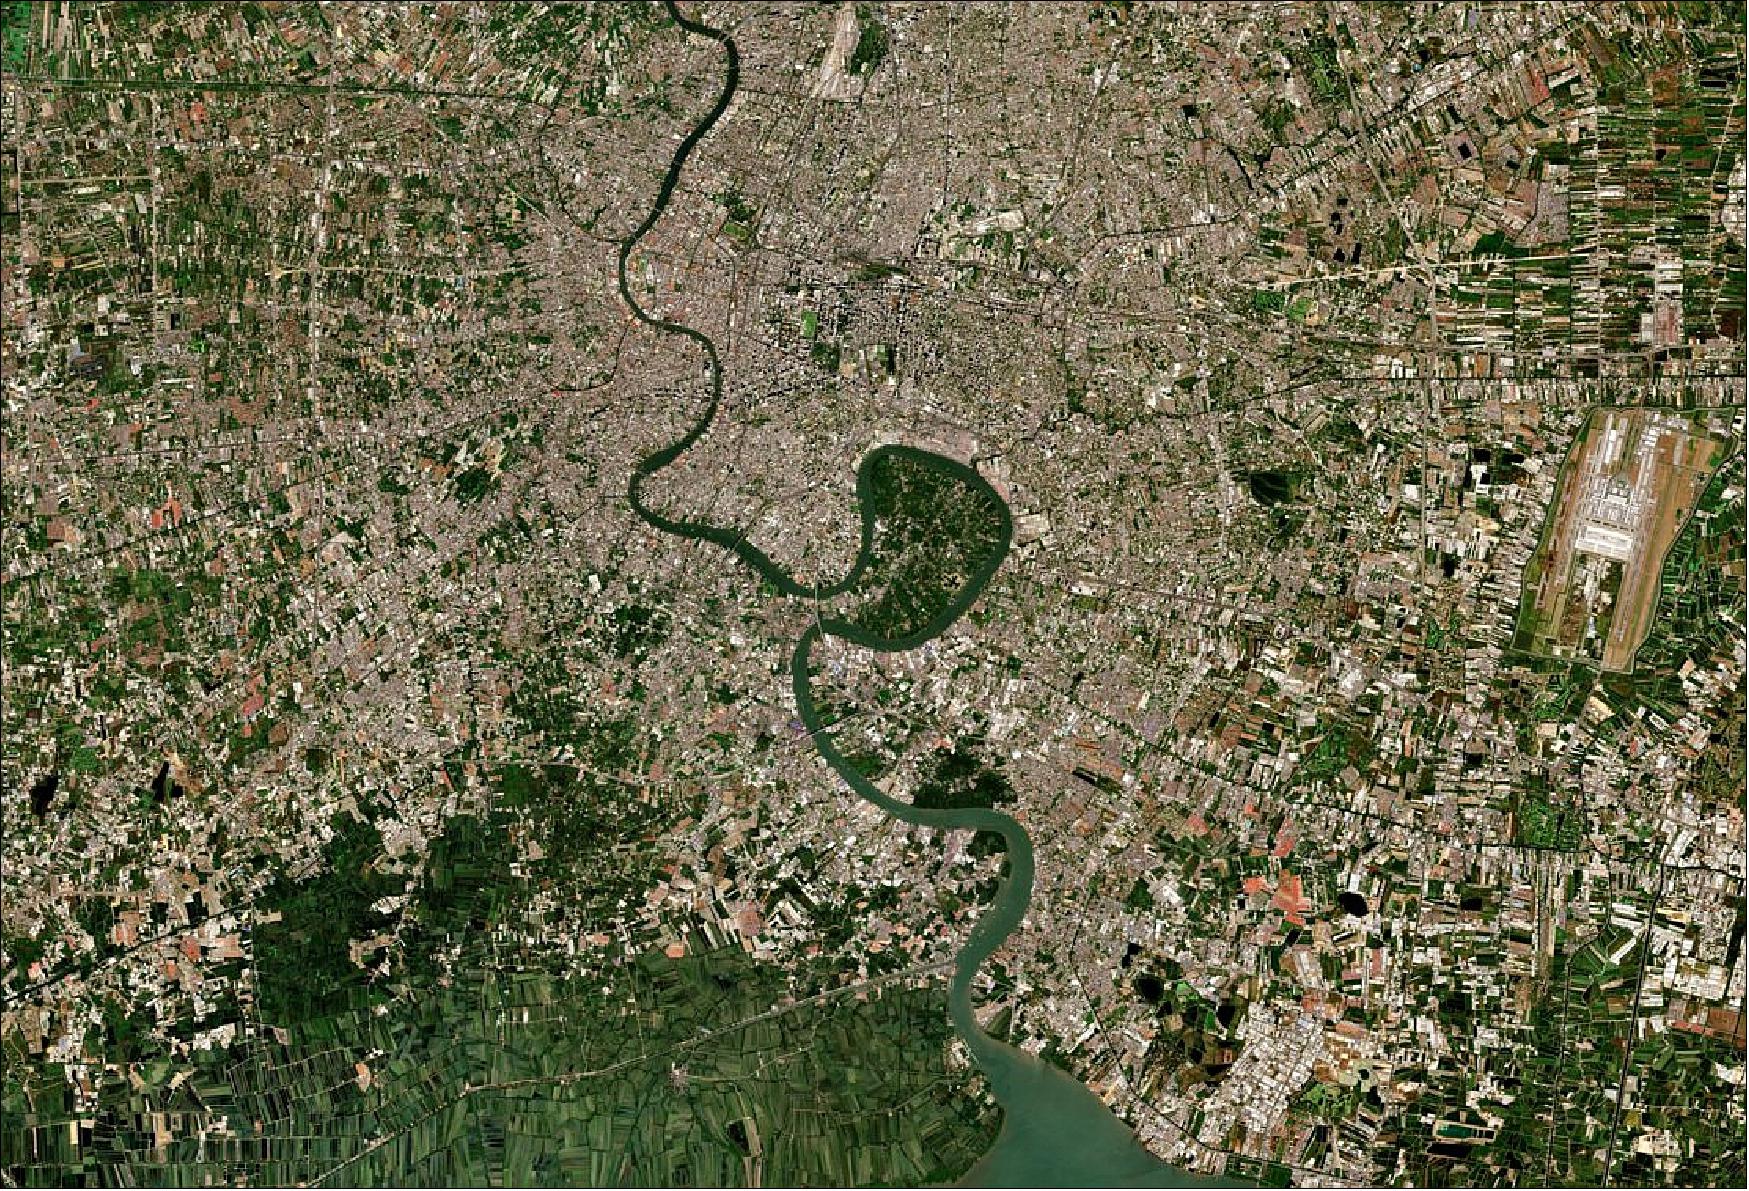 Figure 43: Captured on 22 January 2019 by the Copernicus Sentinel-2B satellite, this true-color image shows Thailand’s most populous city Bangkok, and its ‘Green Lung’ Bang Kachao. The government-protected oasis of green is wrapped around the Chao Phraya River, which is seen flowing through the city of Bangkok before emptying into the Gulf of Thailand (image credit: ESA, the image contains modified Copernicus Sentinel data (2019), processed by ESA, CC BY-SA 3.0 IGO)